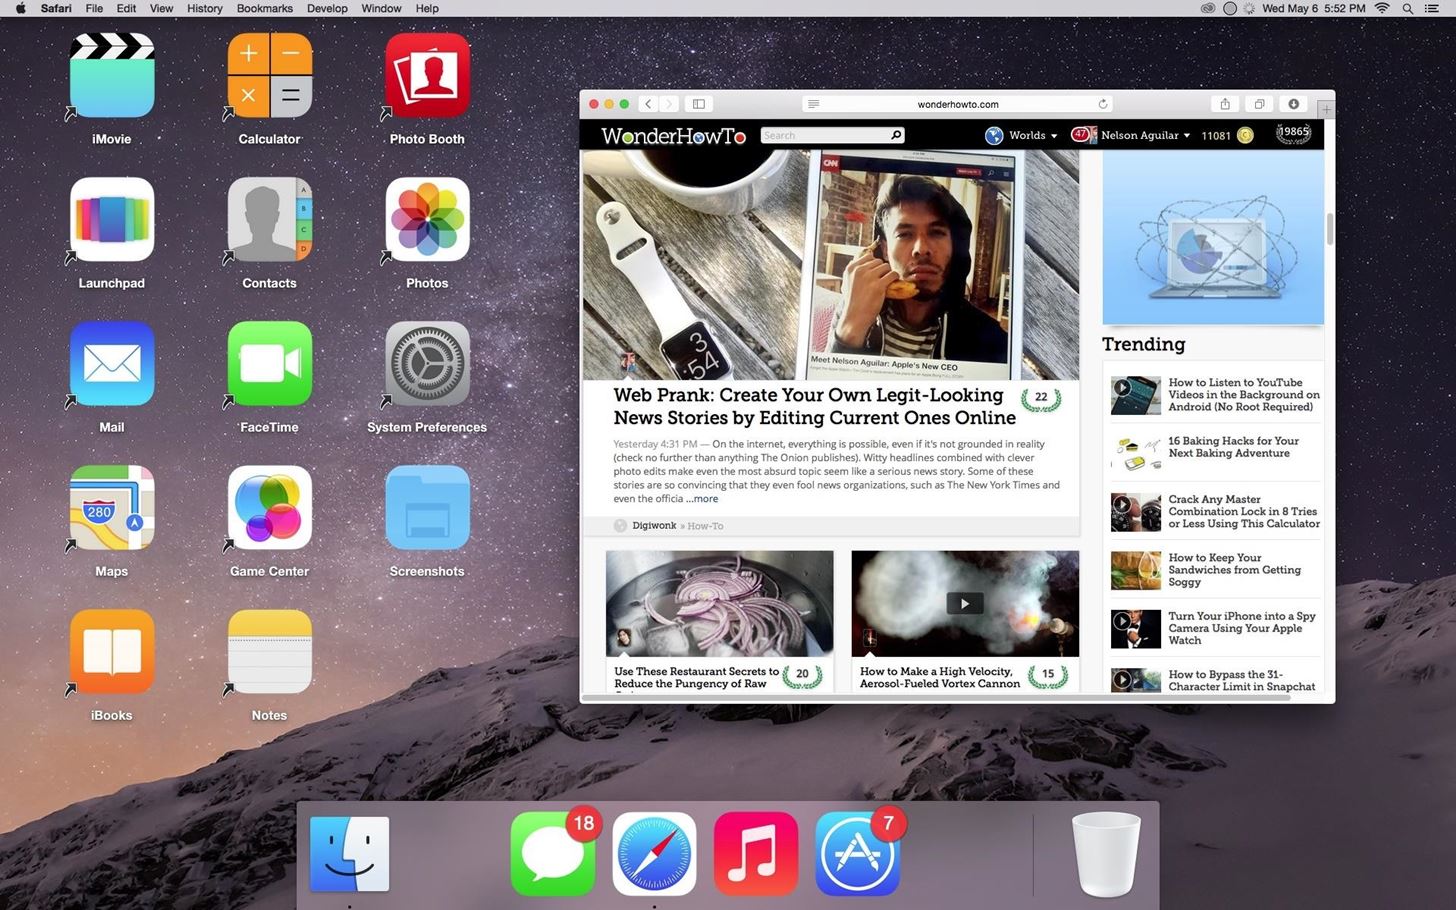 How to Make Your Mac Look & Feel More Like Your iPhone